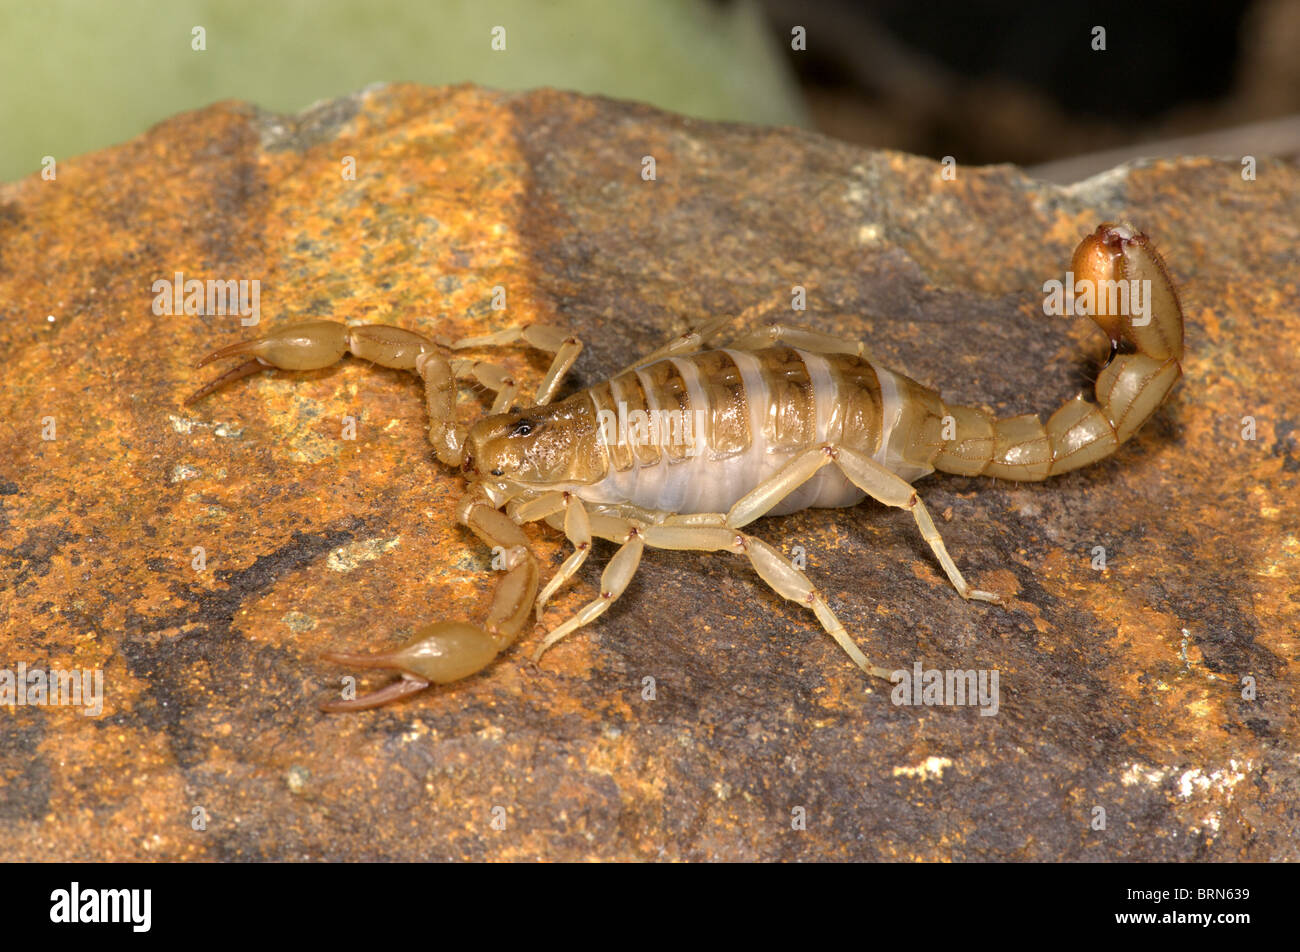 Stripe-tailed Scorpion Banque D'Images